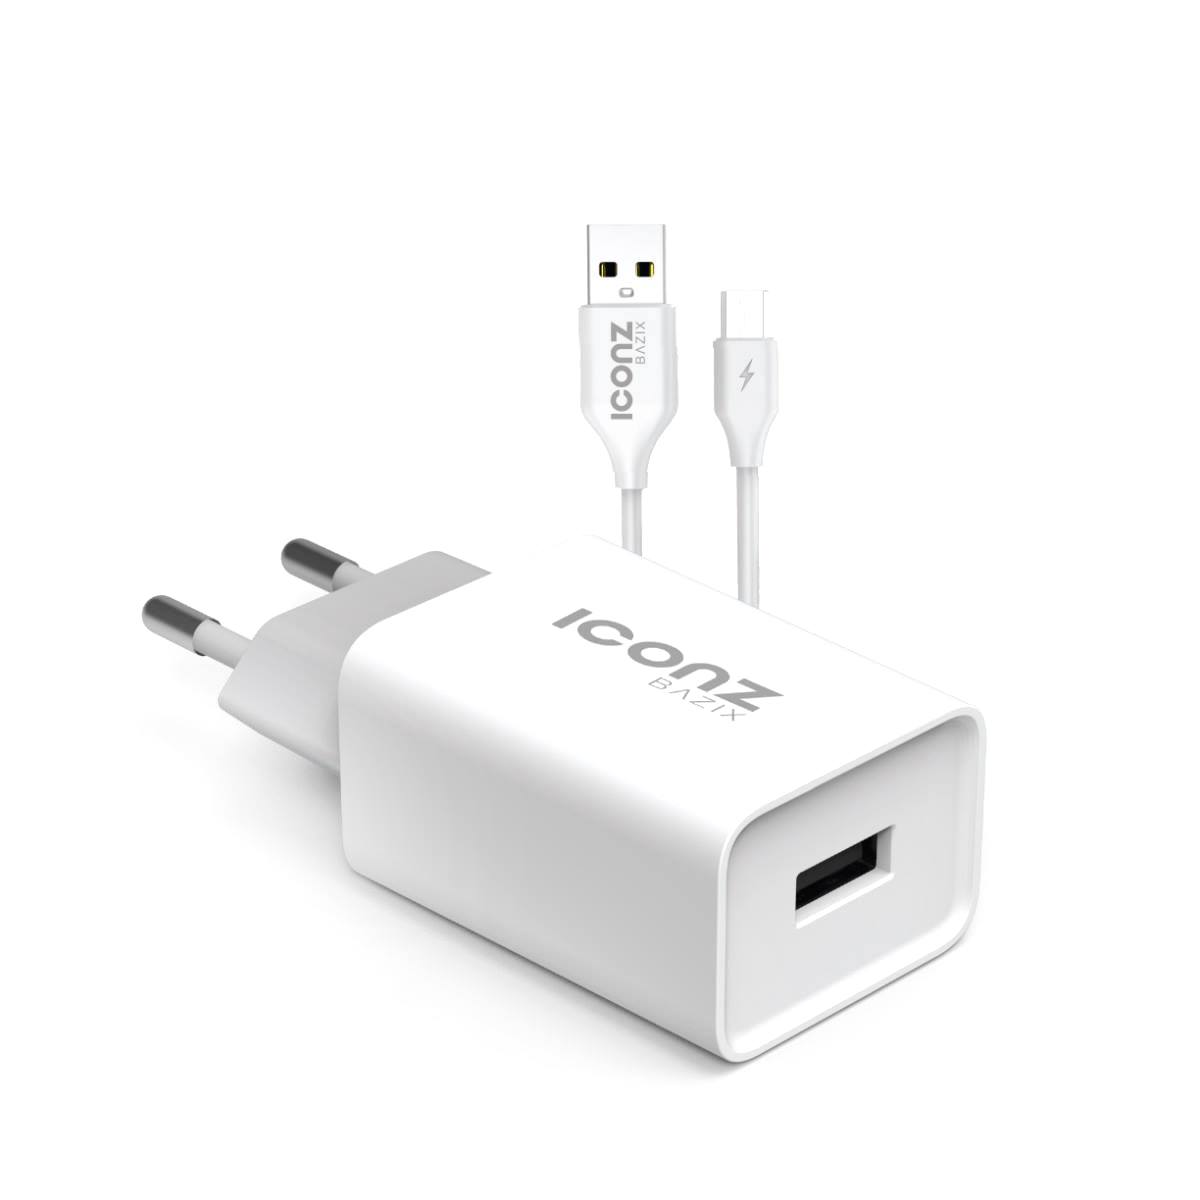 ICONZ Wall Charger, 1 Port, White - XWC04